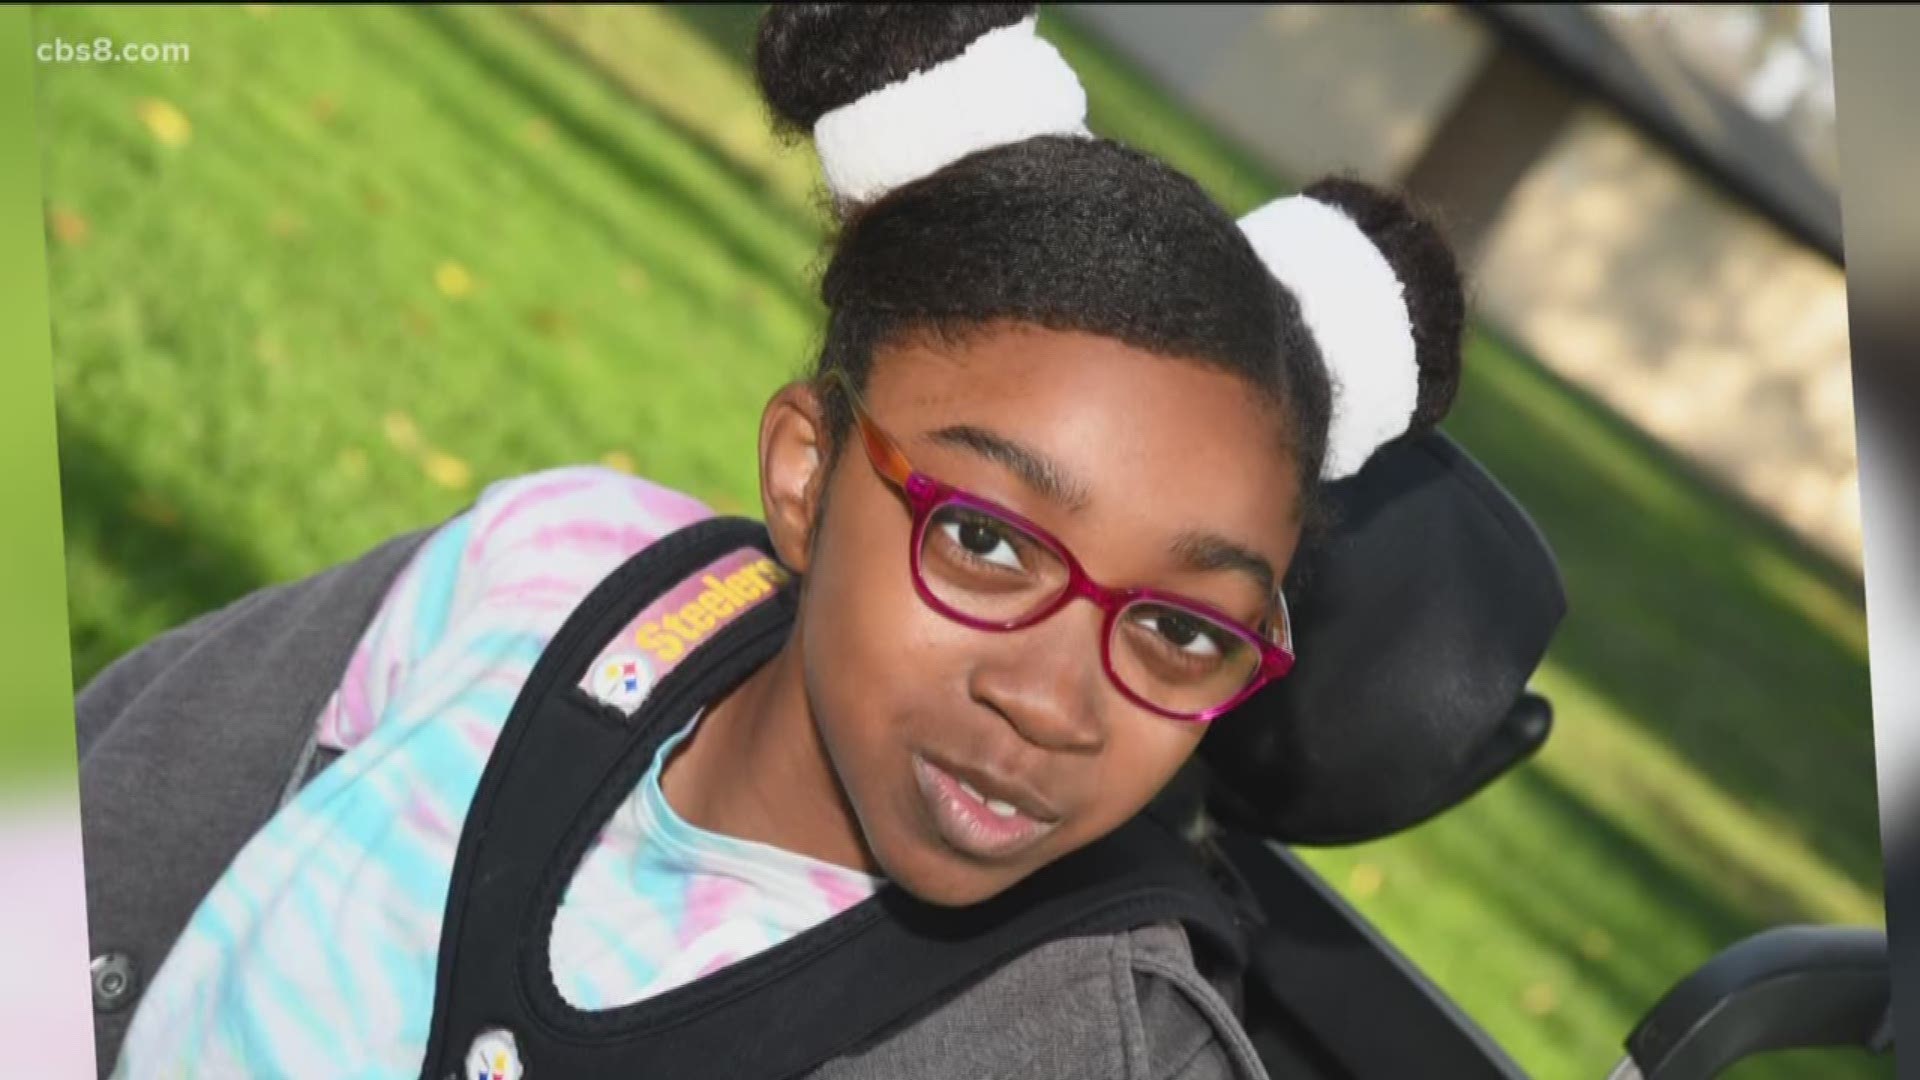 13-year-old Tatiana has a positive spirit that's contagious. Could you be her forever family?